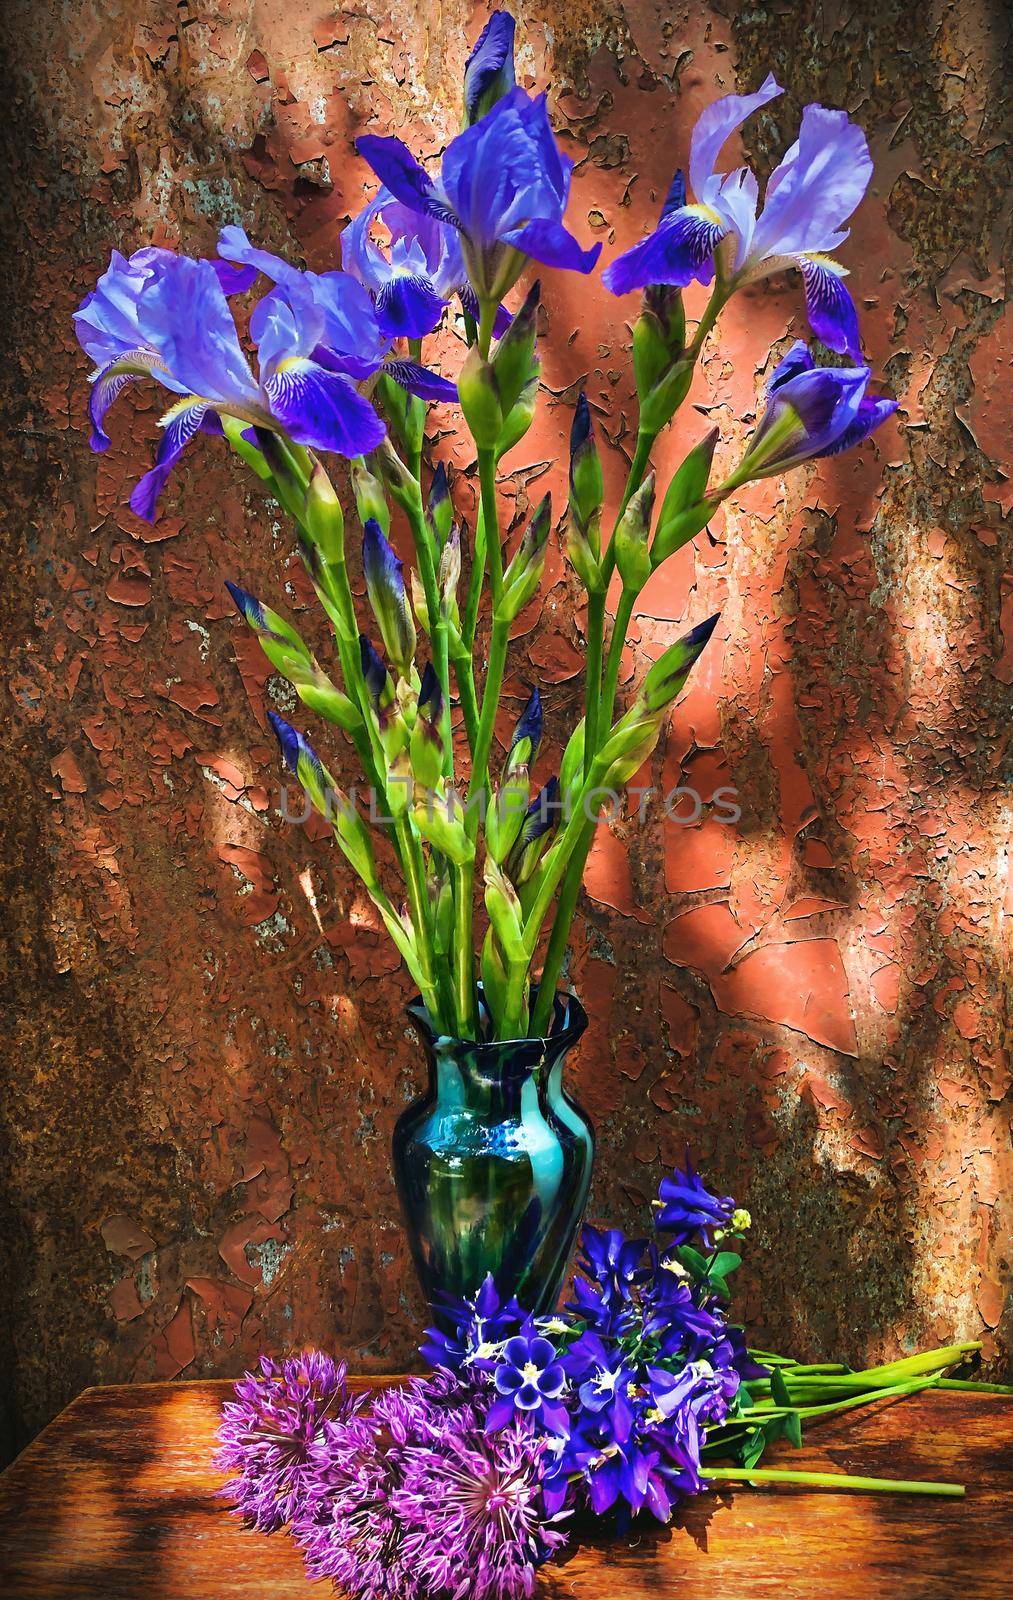 Romantic bouquets of flowers. Home decor and flowers arranging. In composition used blue irises and purple aliums